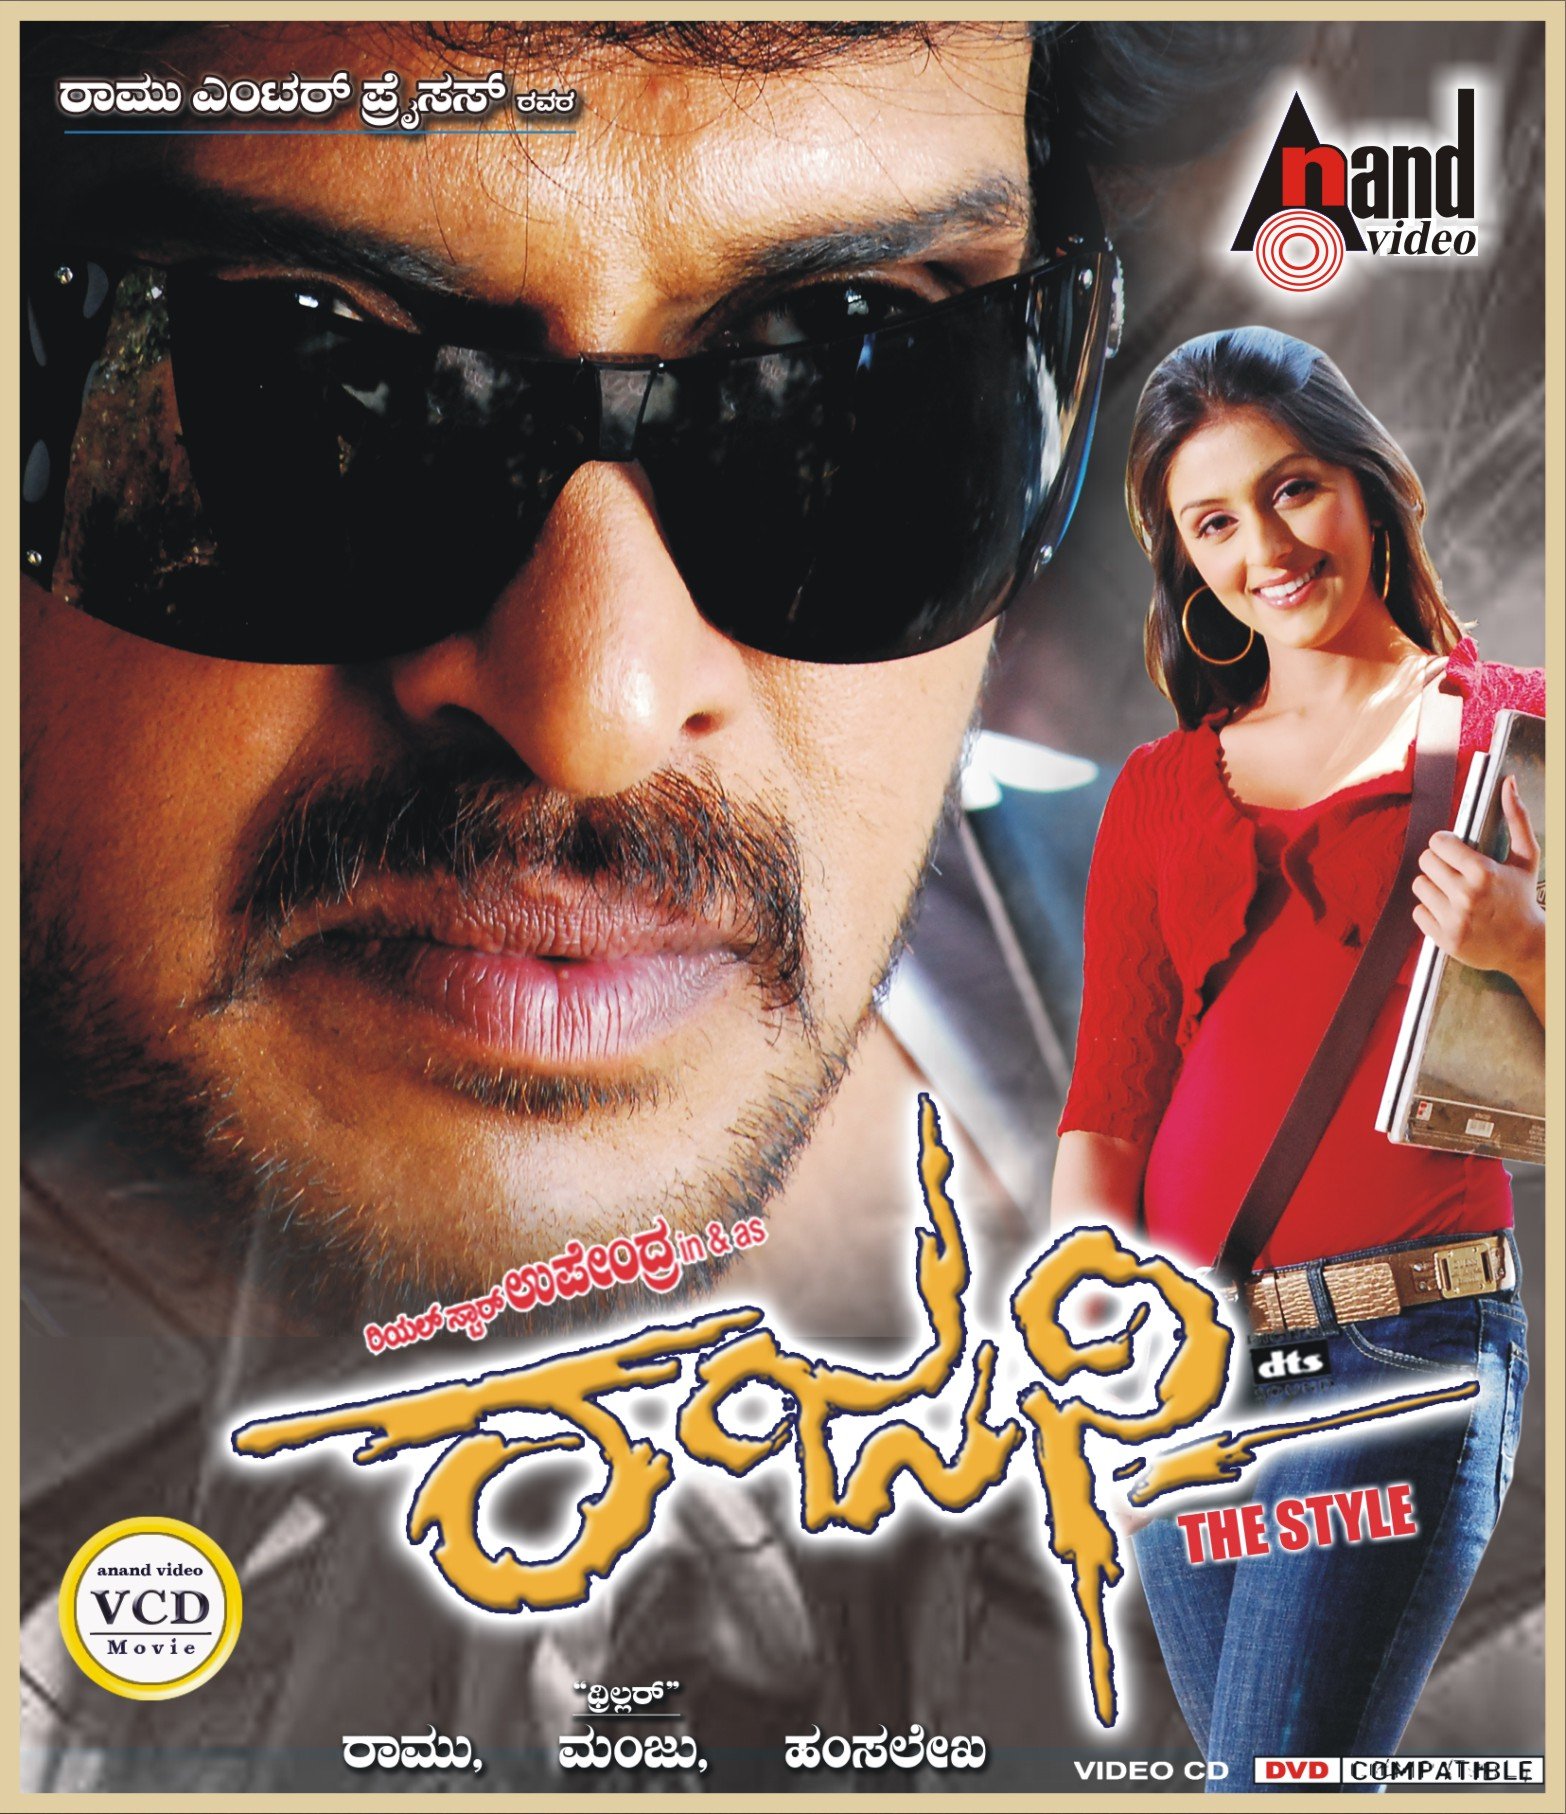 rajani-movie-purchase-or-watch-online